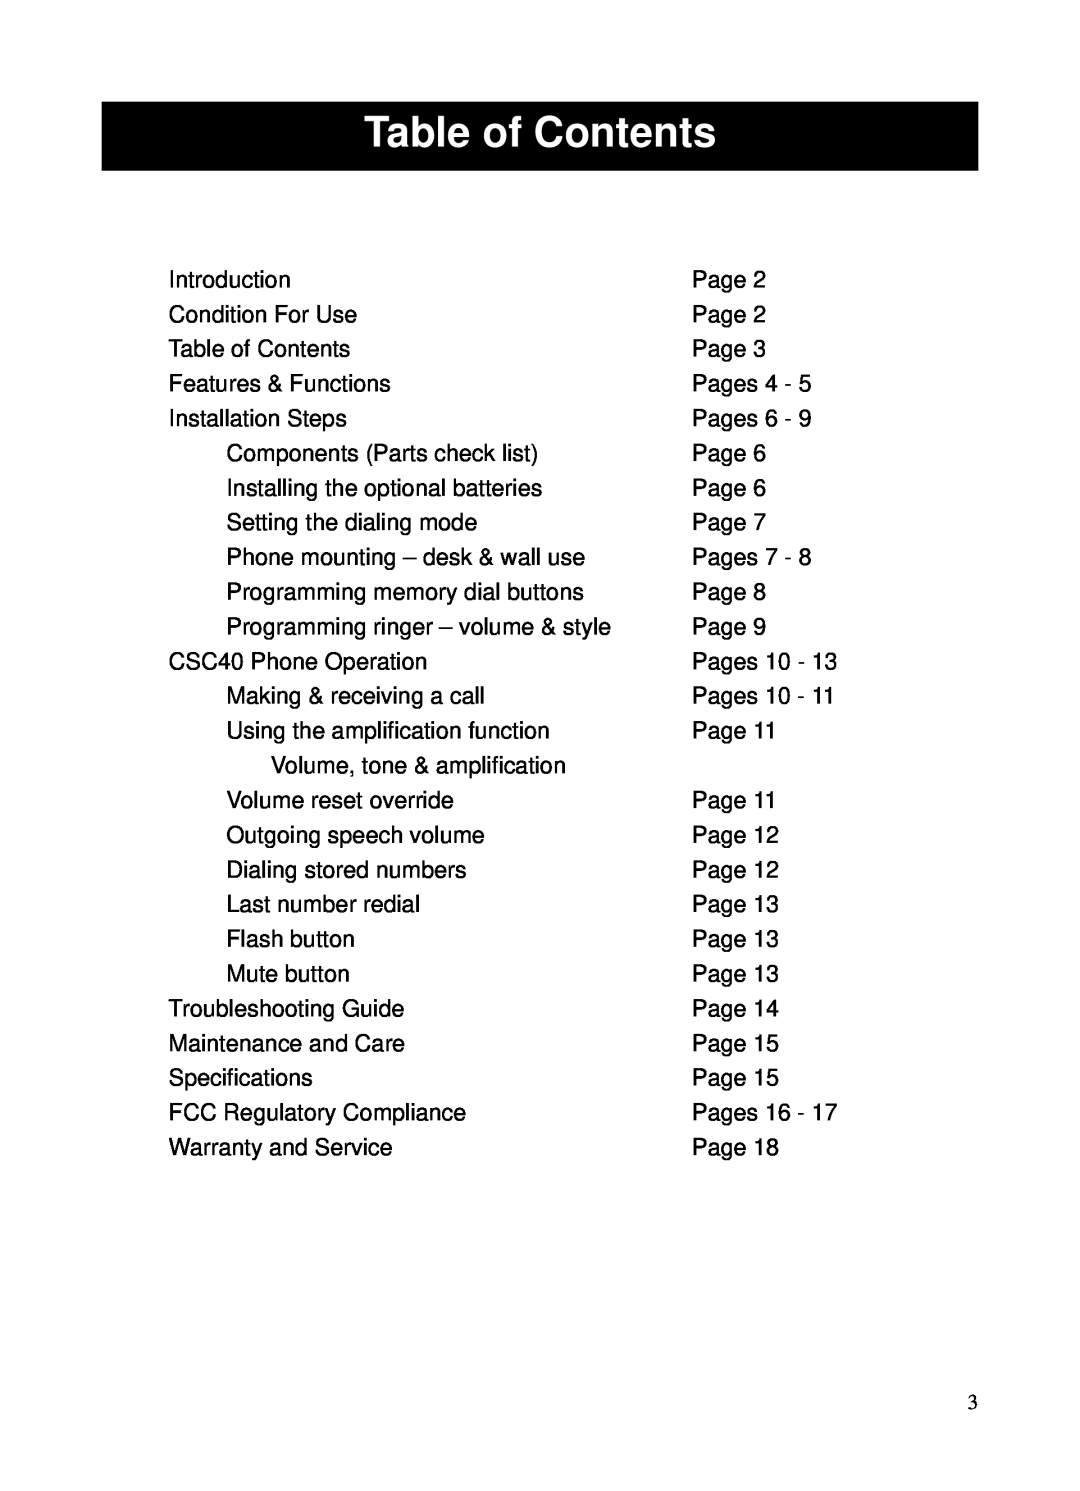 ClearSounds CSC40 user manual Table of Contents 